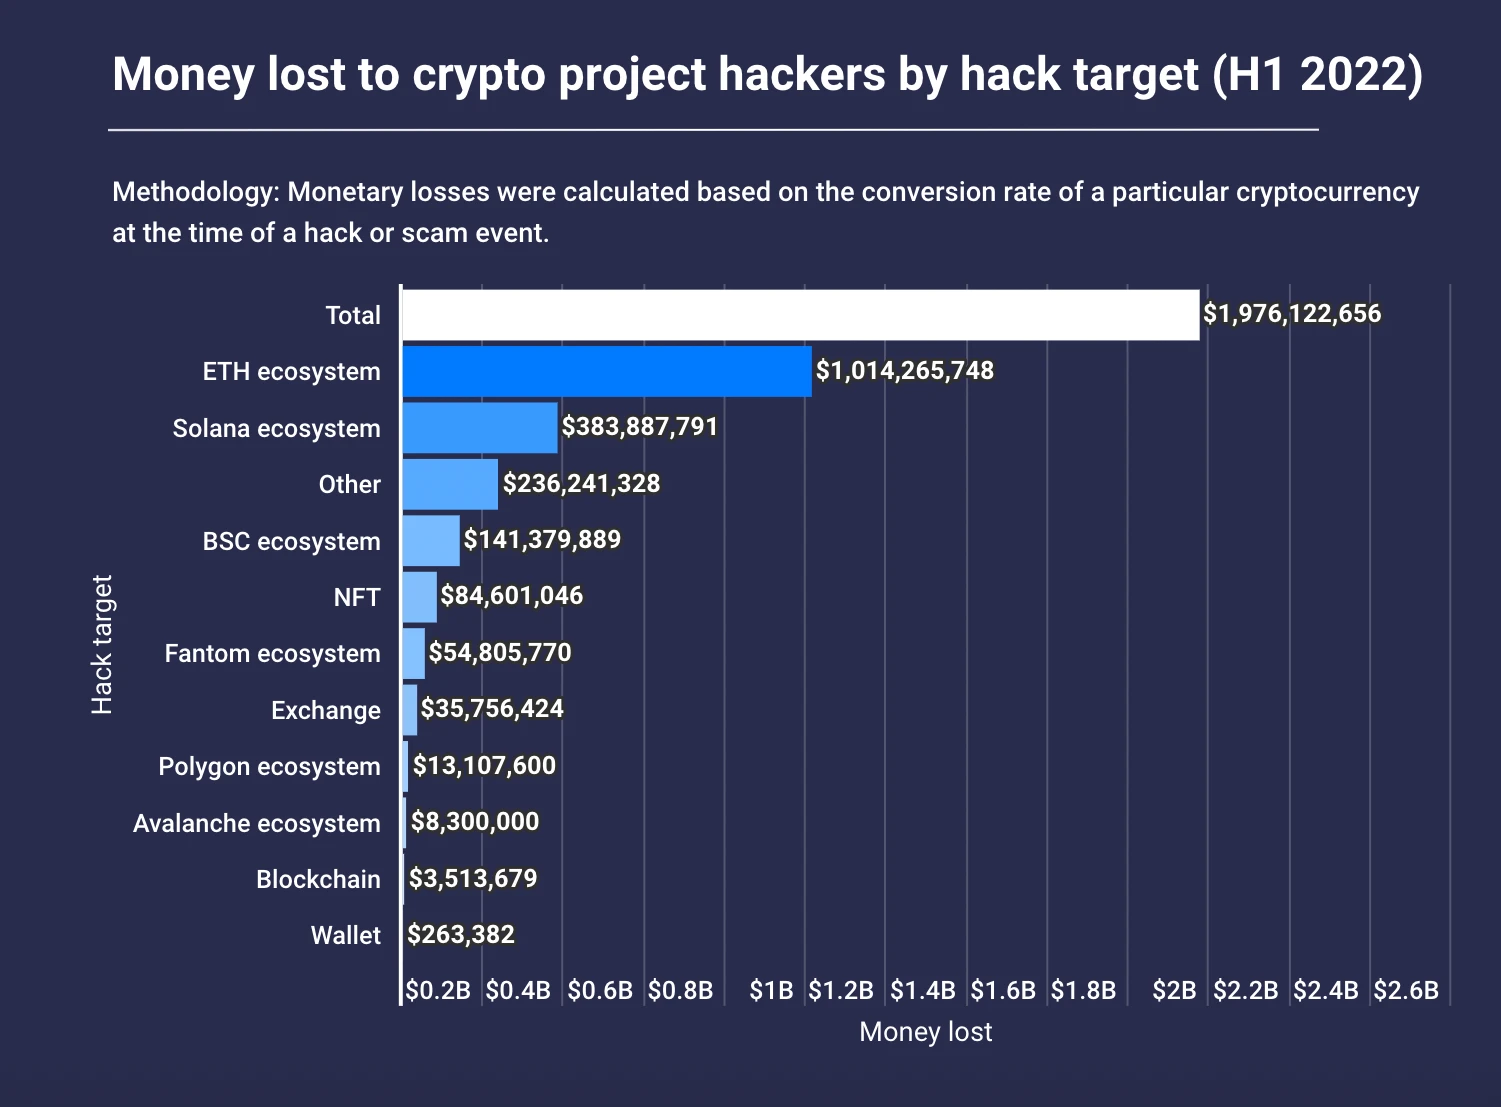 A chart by SlowMist showing money lost to crypto hackers by hack target in H1 2022.